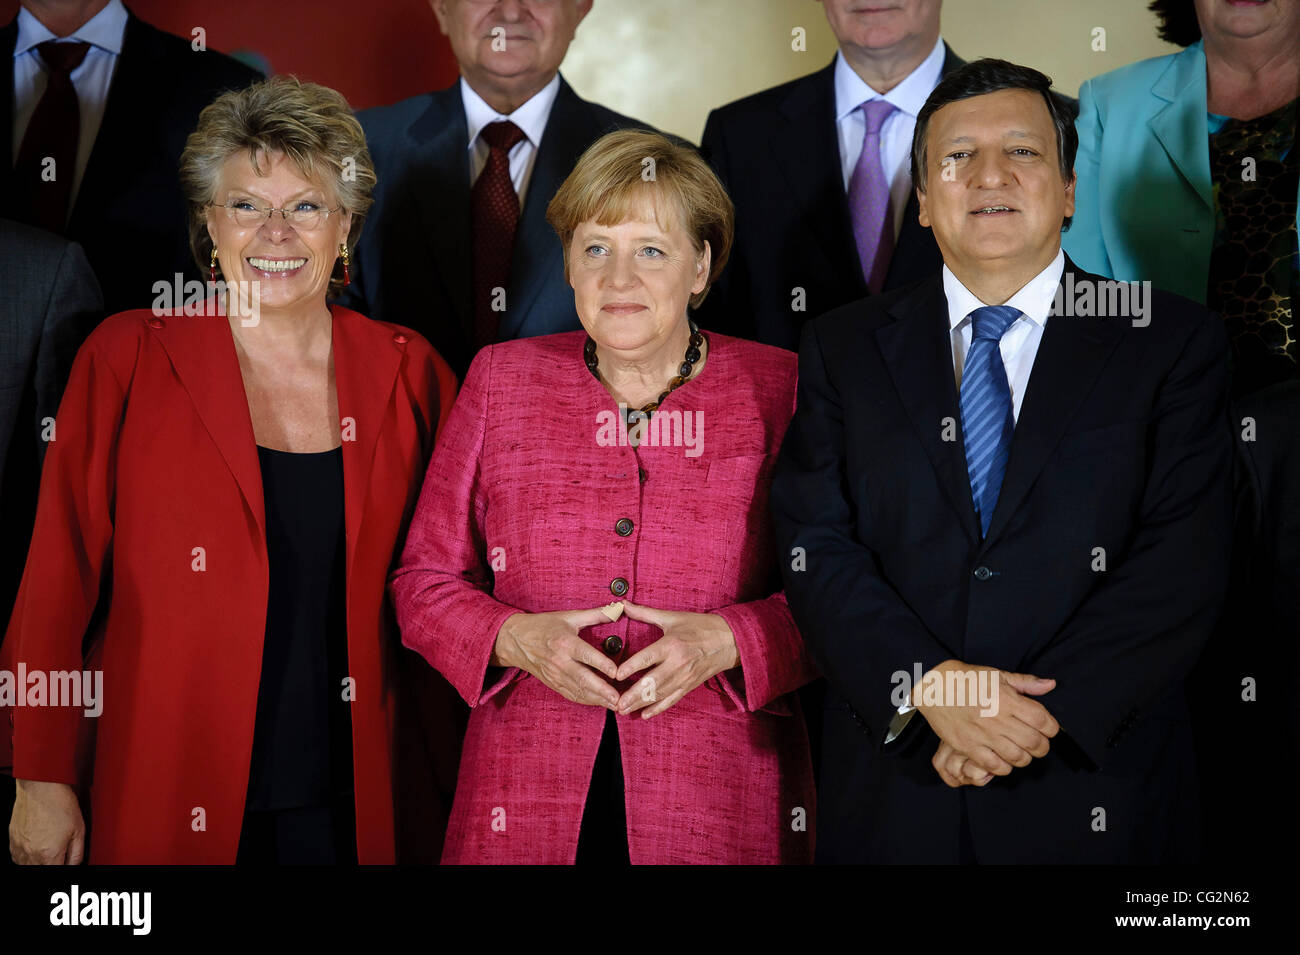 Oct. 5, 2011 - Brussels, BXL, Belgium -  German Chancellor Angela Merkel (C) and European Commission President Jose Manuel Barroso (R) chat during a familly picture with members of the European commission after a lunch meeting at the EU commission headquarters in  Brussels, Belgium on 2011-10-05 Mer Stock Photo